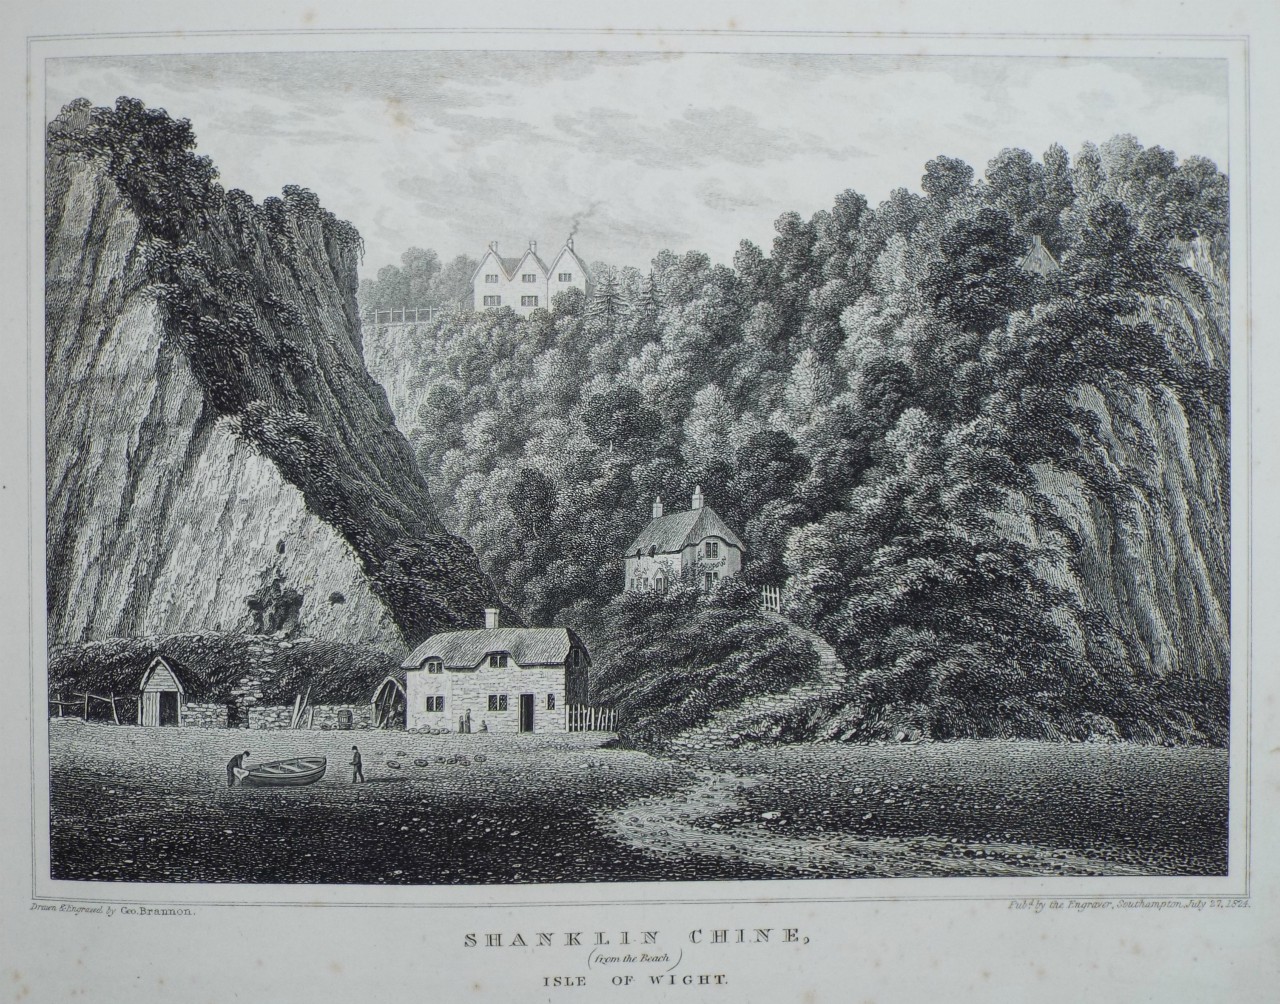 Shanklin Chine, 1824, by George Brannon. Click to enlarge.